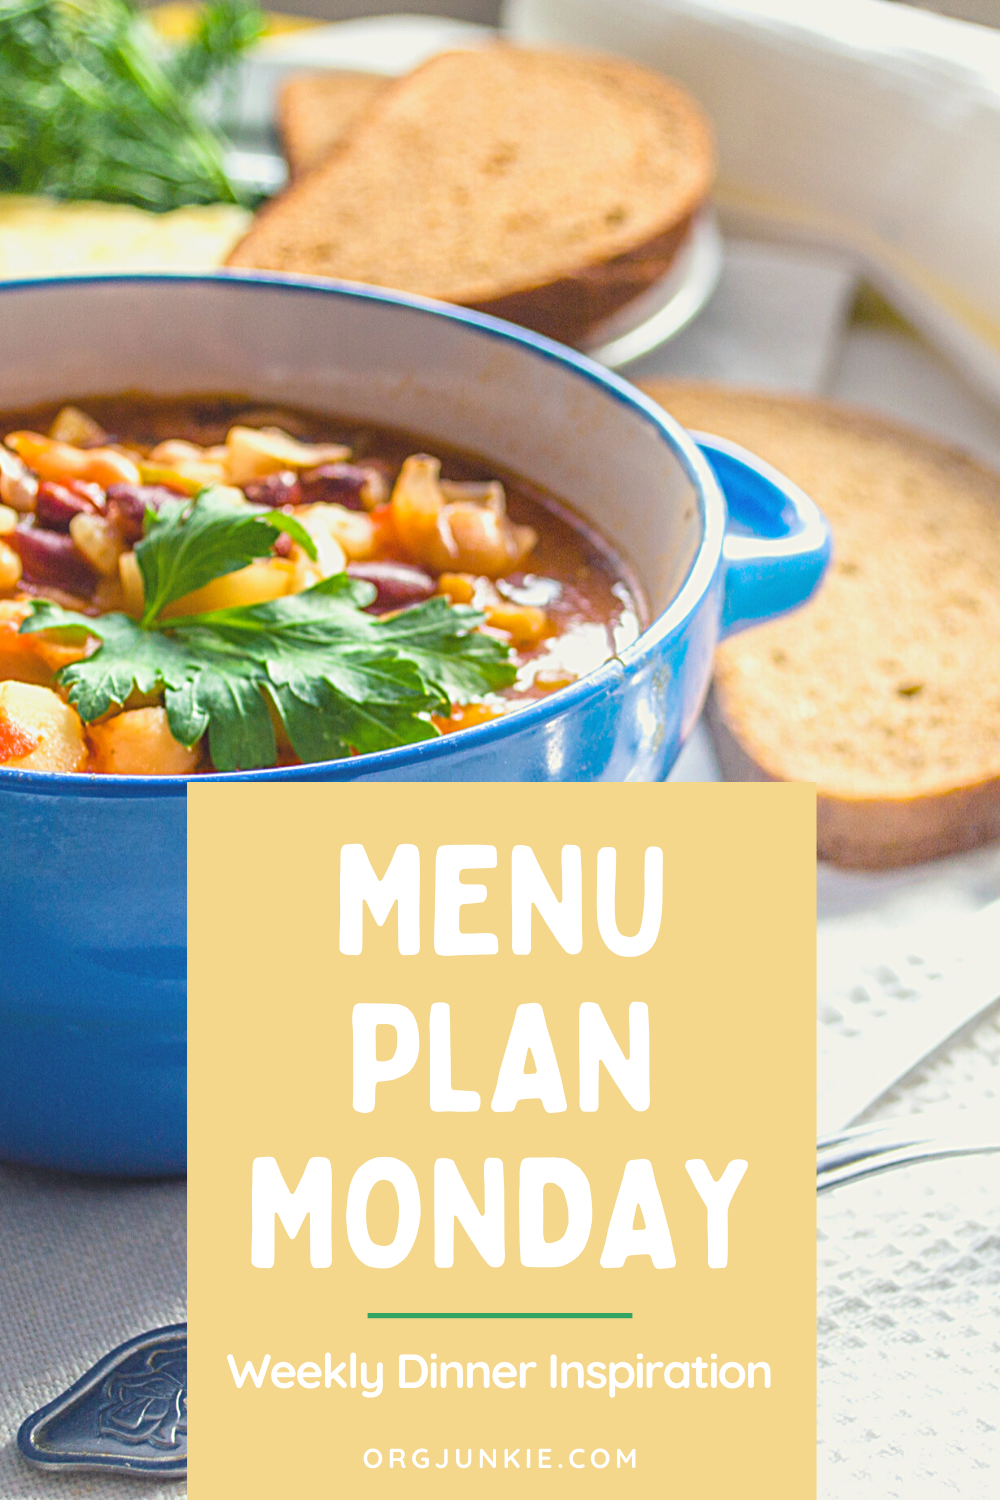 Menu Plan Monday for the week of Oct 26/20 ~ Weekly Dinner Inspiration at I'm an Organizing Junkie